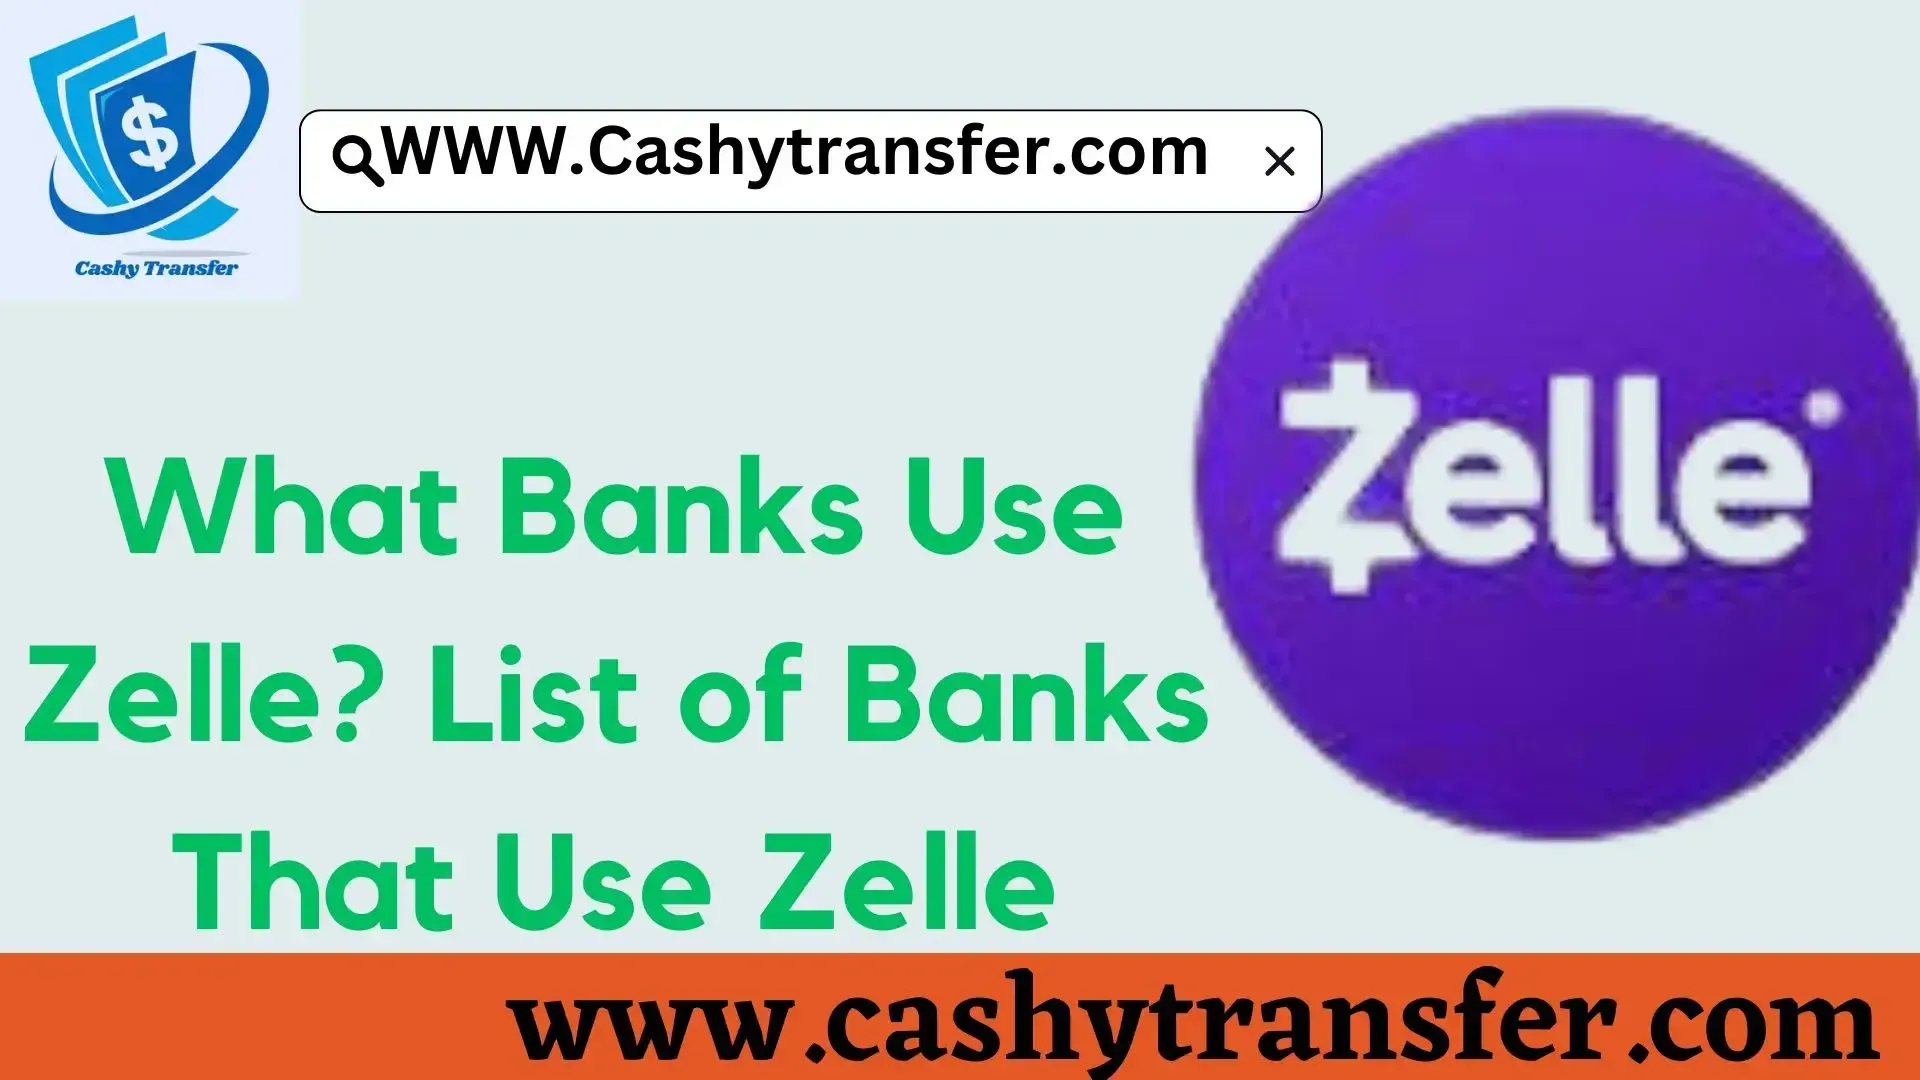 What Banks Use Zelle